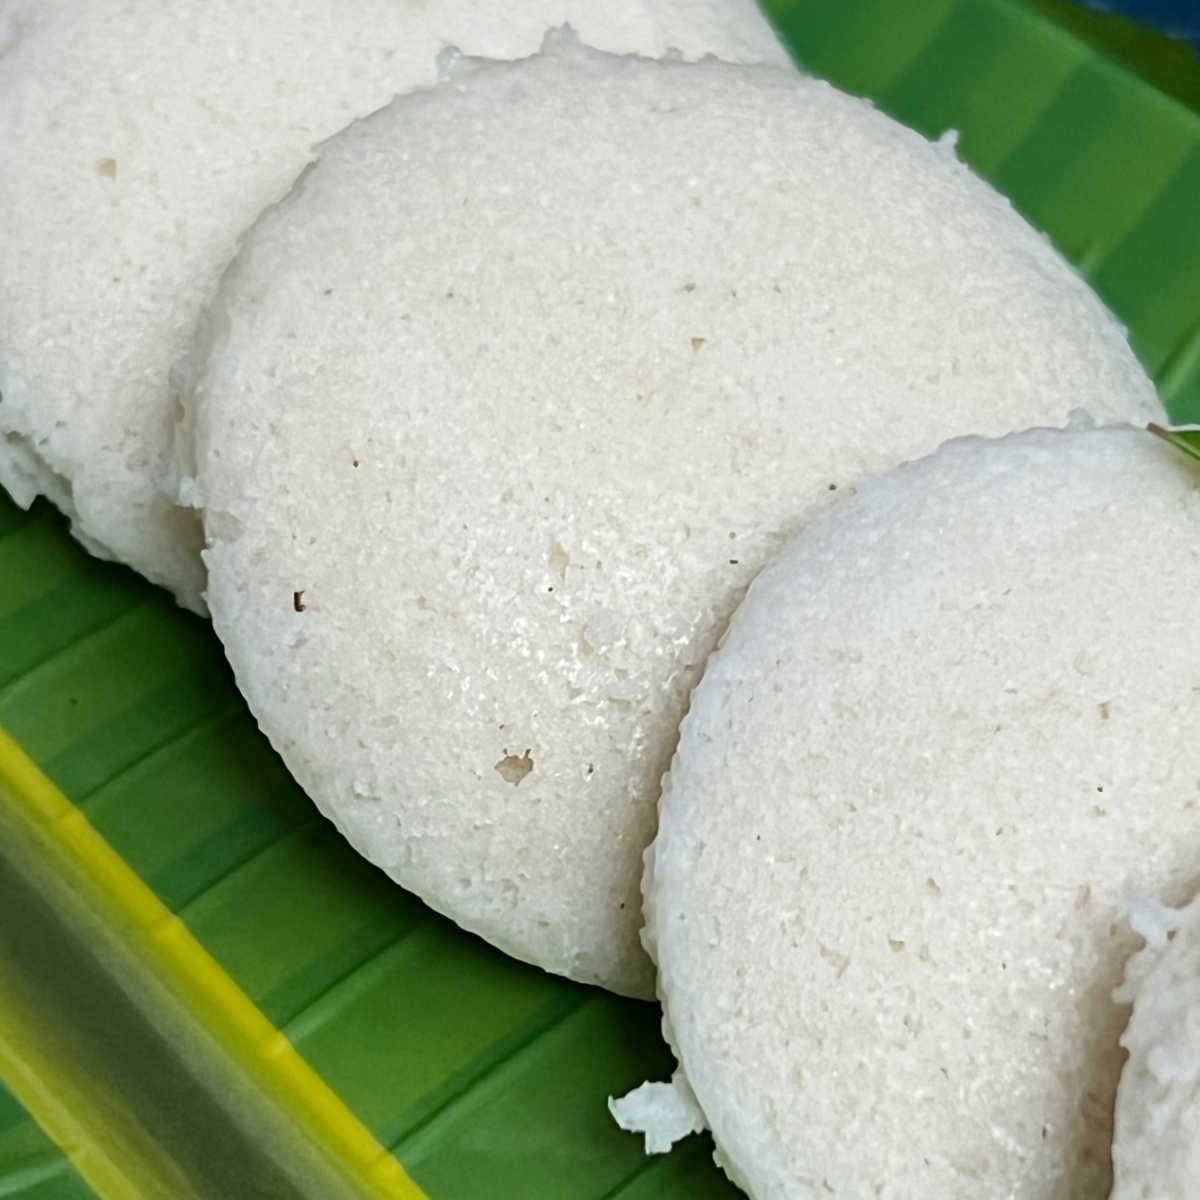 A close up of idli showing the fluffy texture.